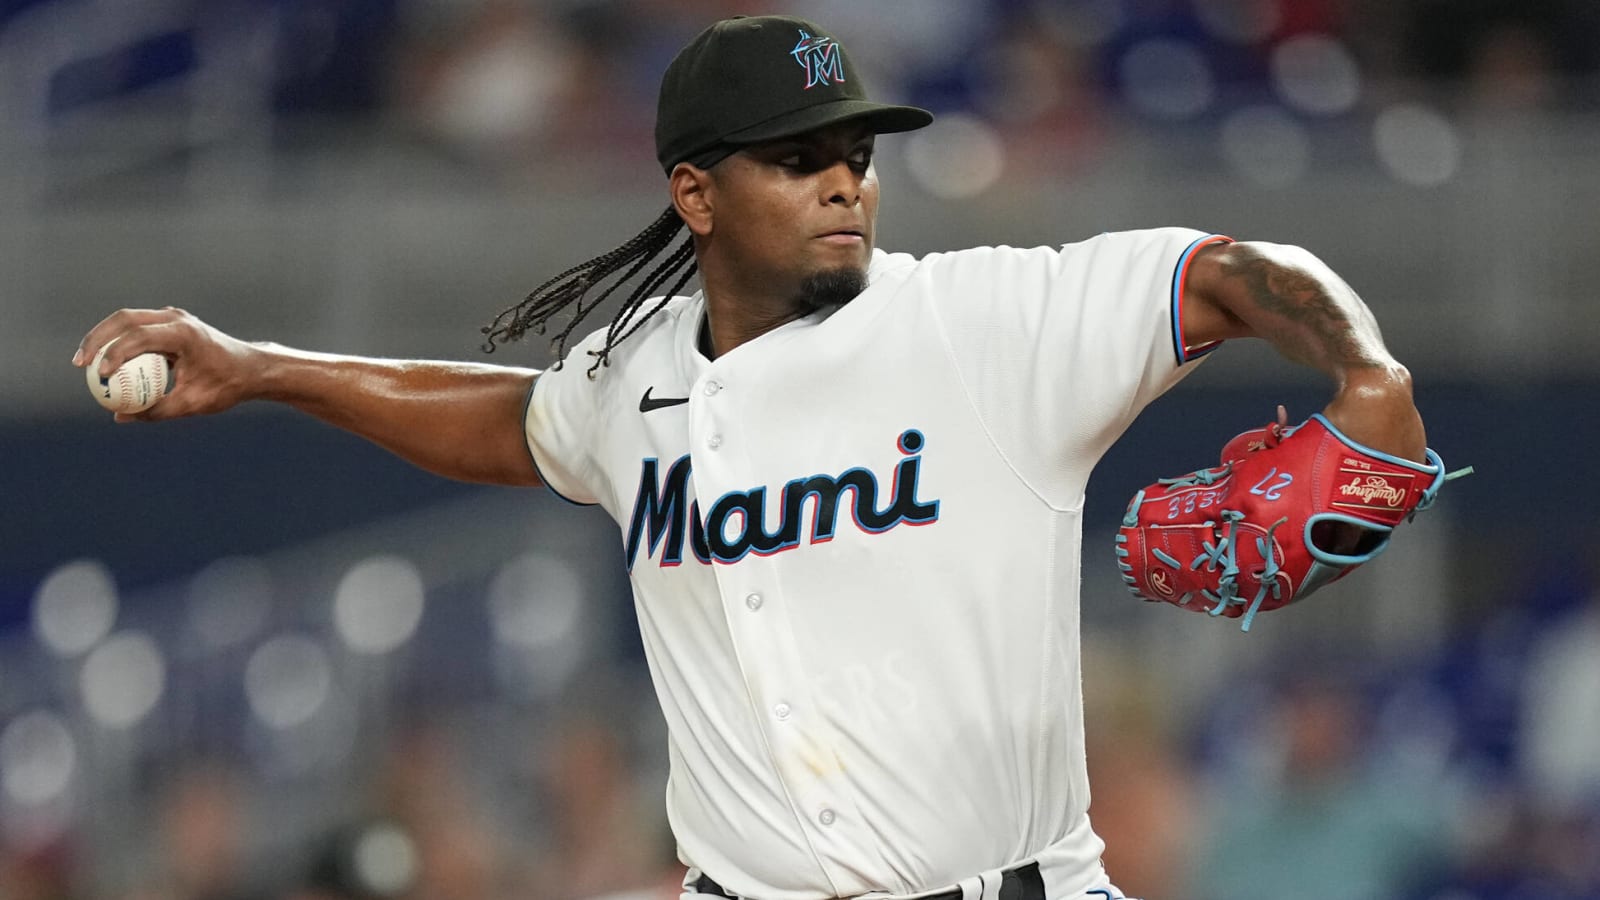 Marlins option RHP after busy trade-deadline day